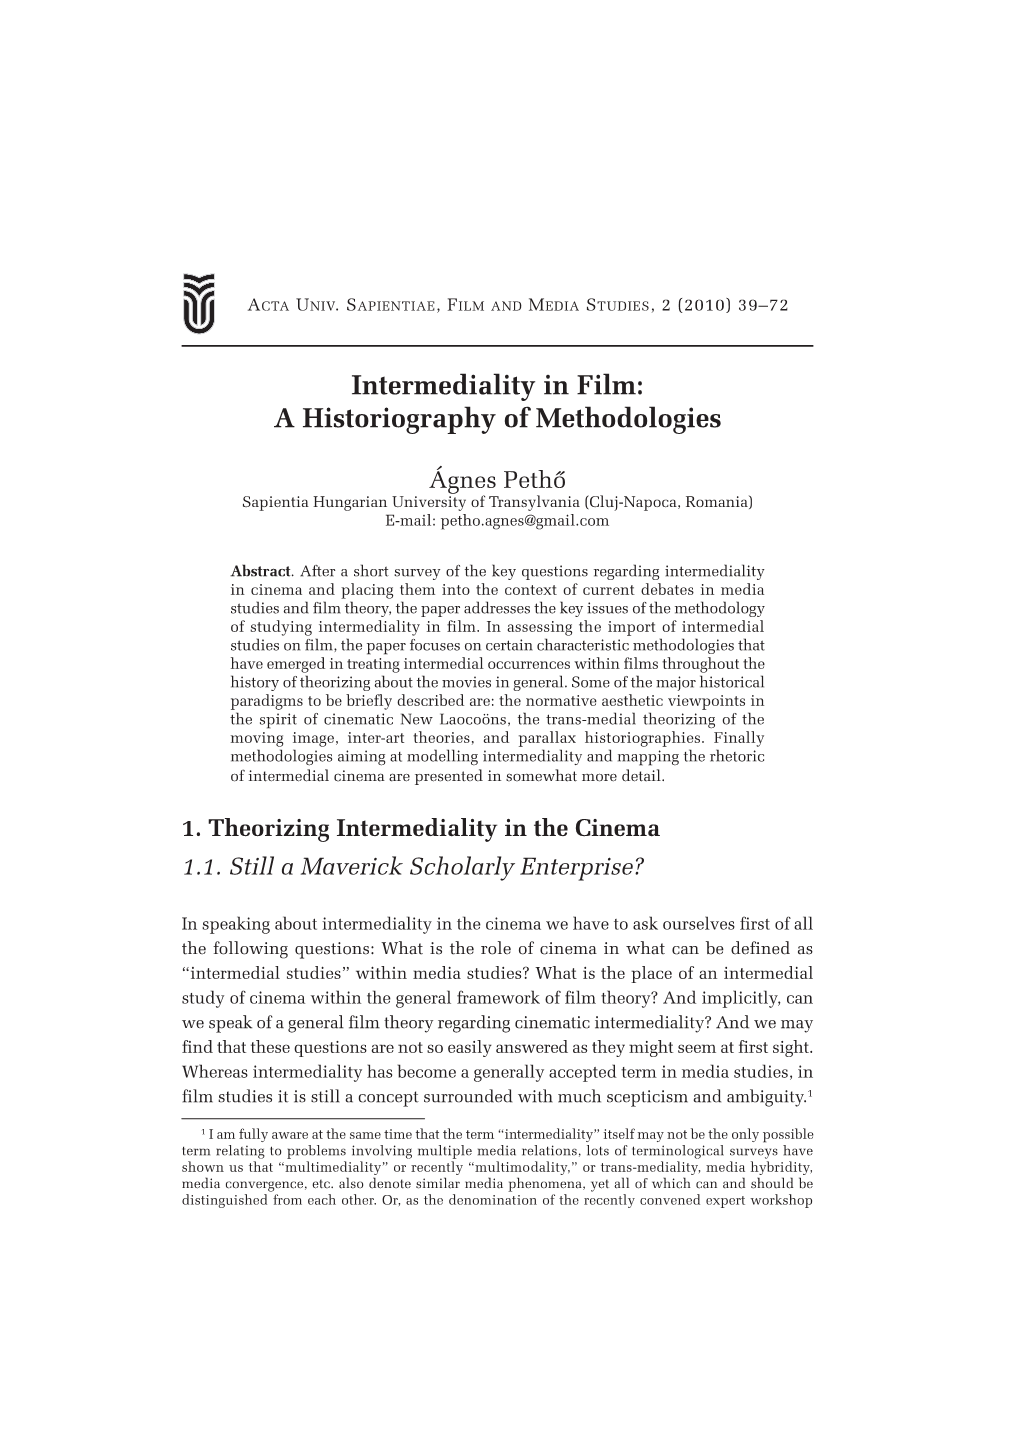 Intermediality in Film: a Historiography of Methodologies